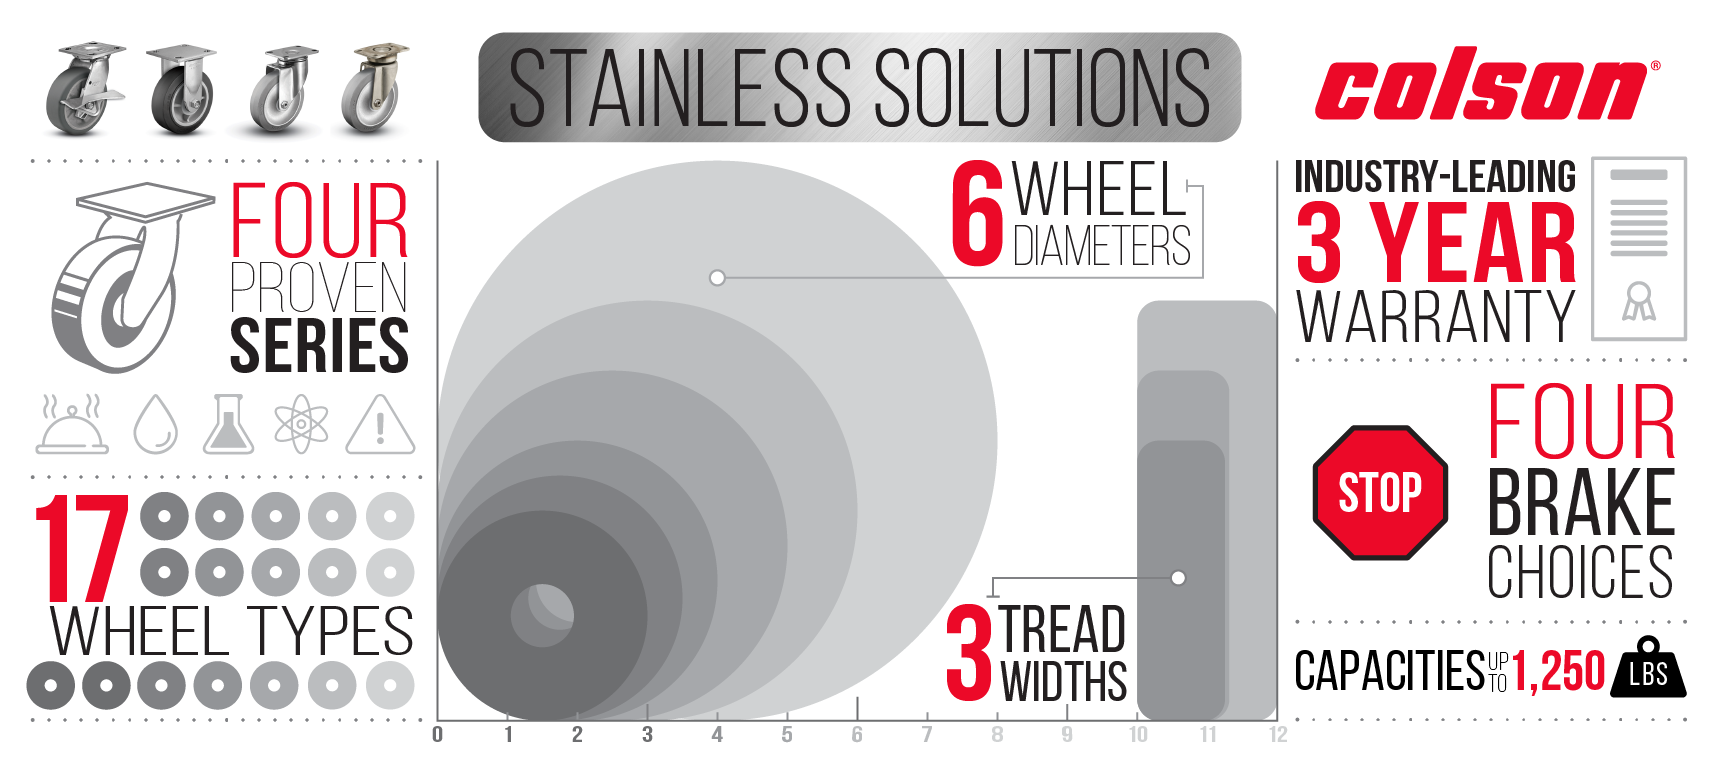 Colson Stainless Solutions Infographic